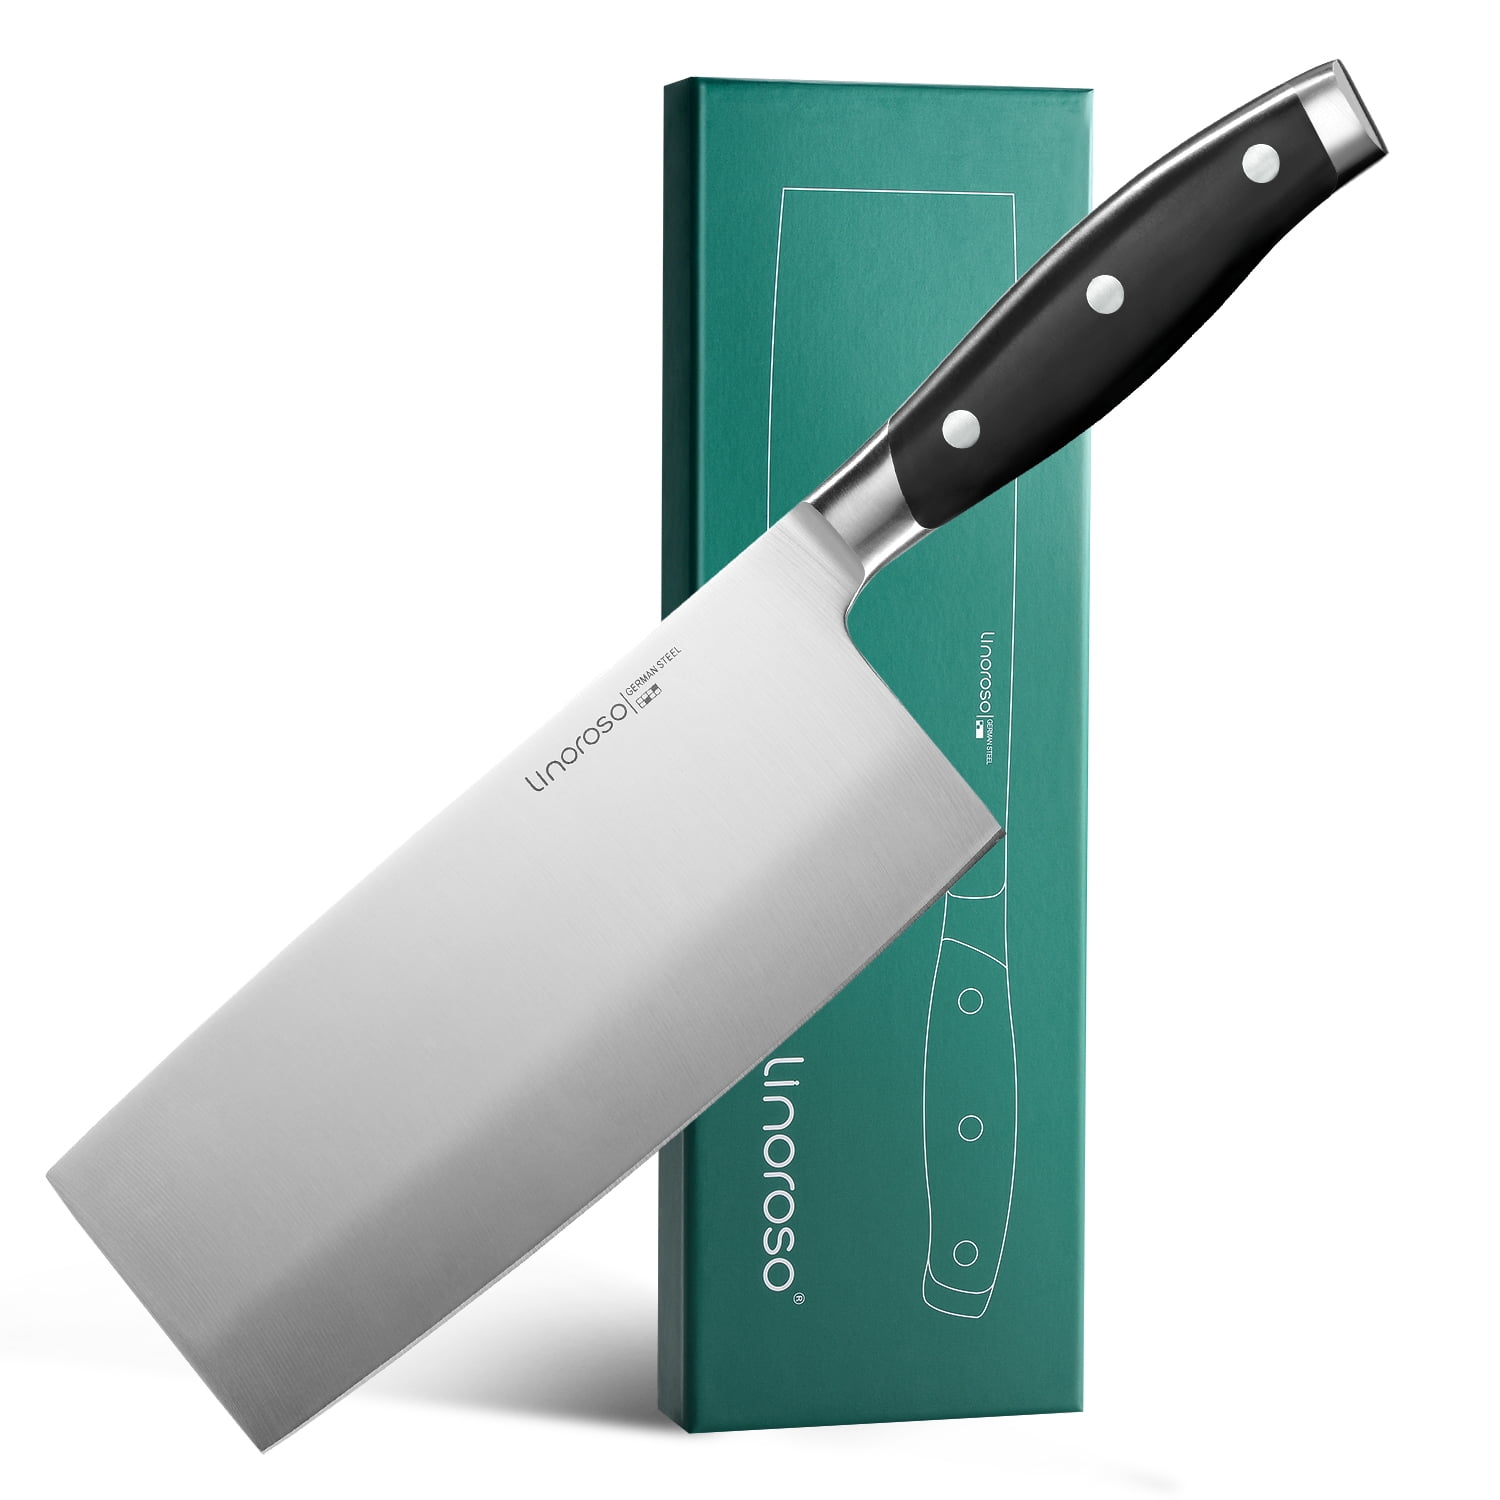 Chinese Chef Knives - Town Food Service Equipment Co., Inc.